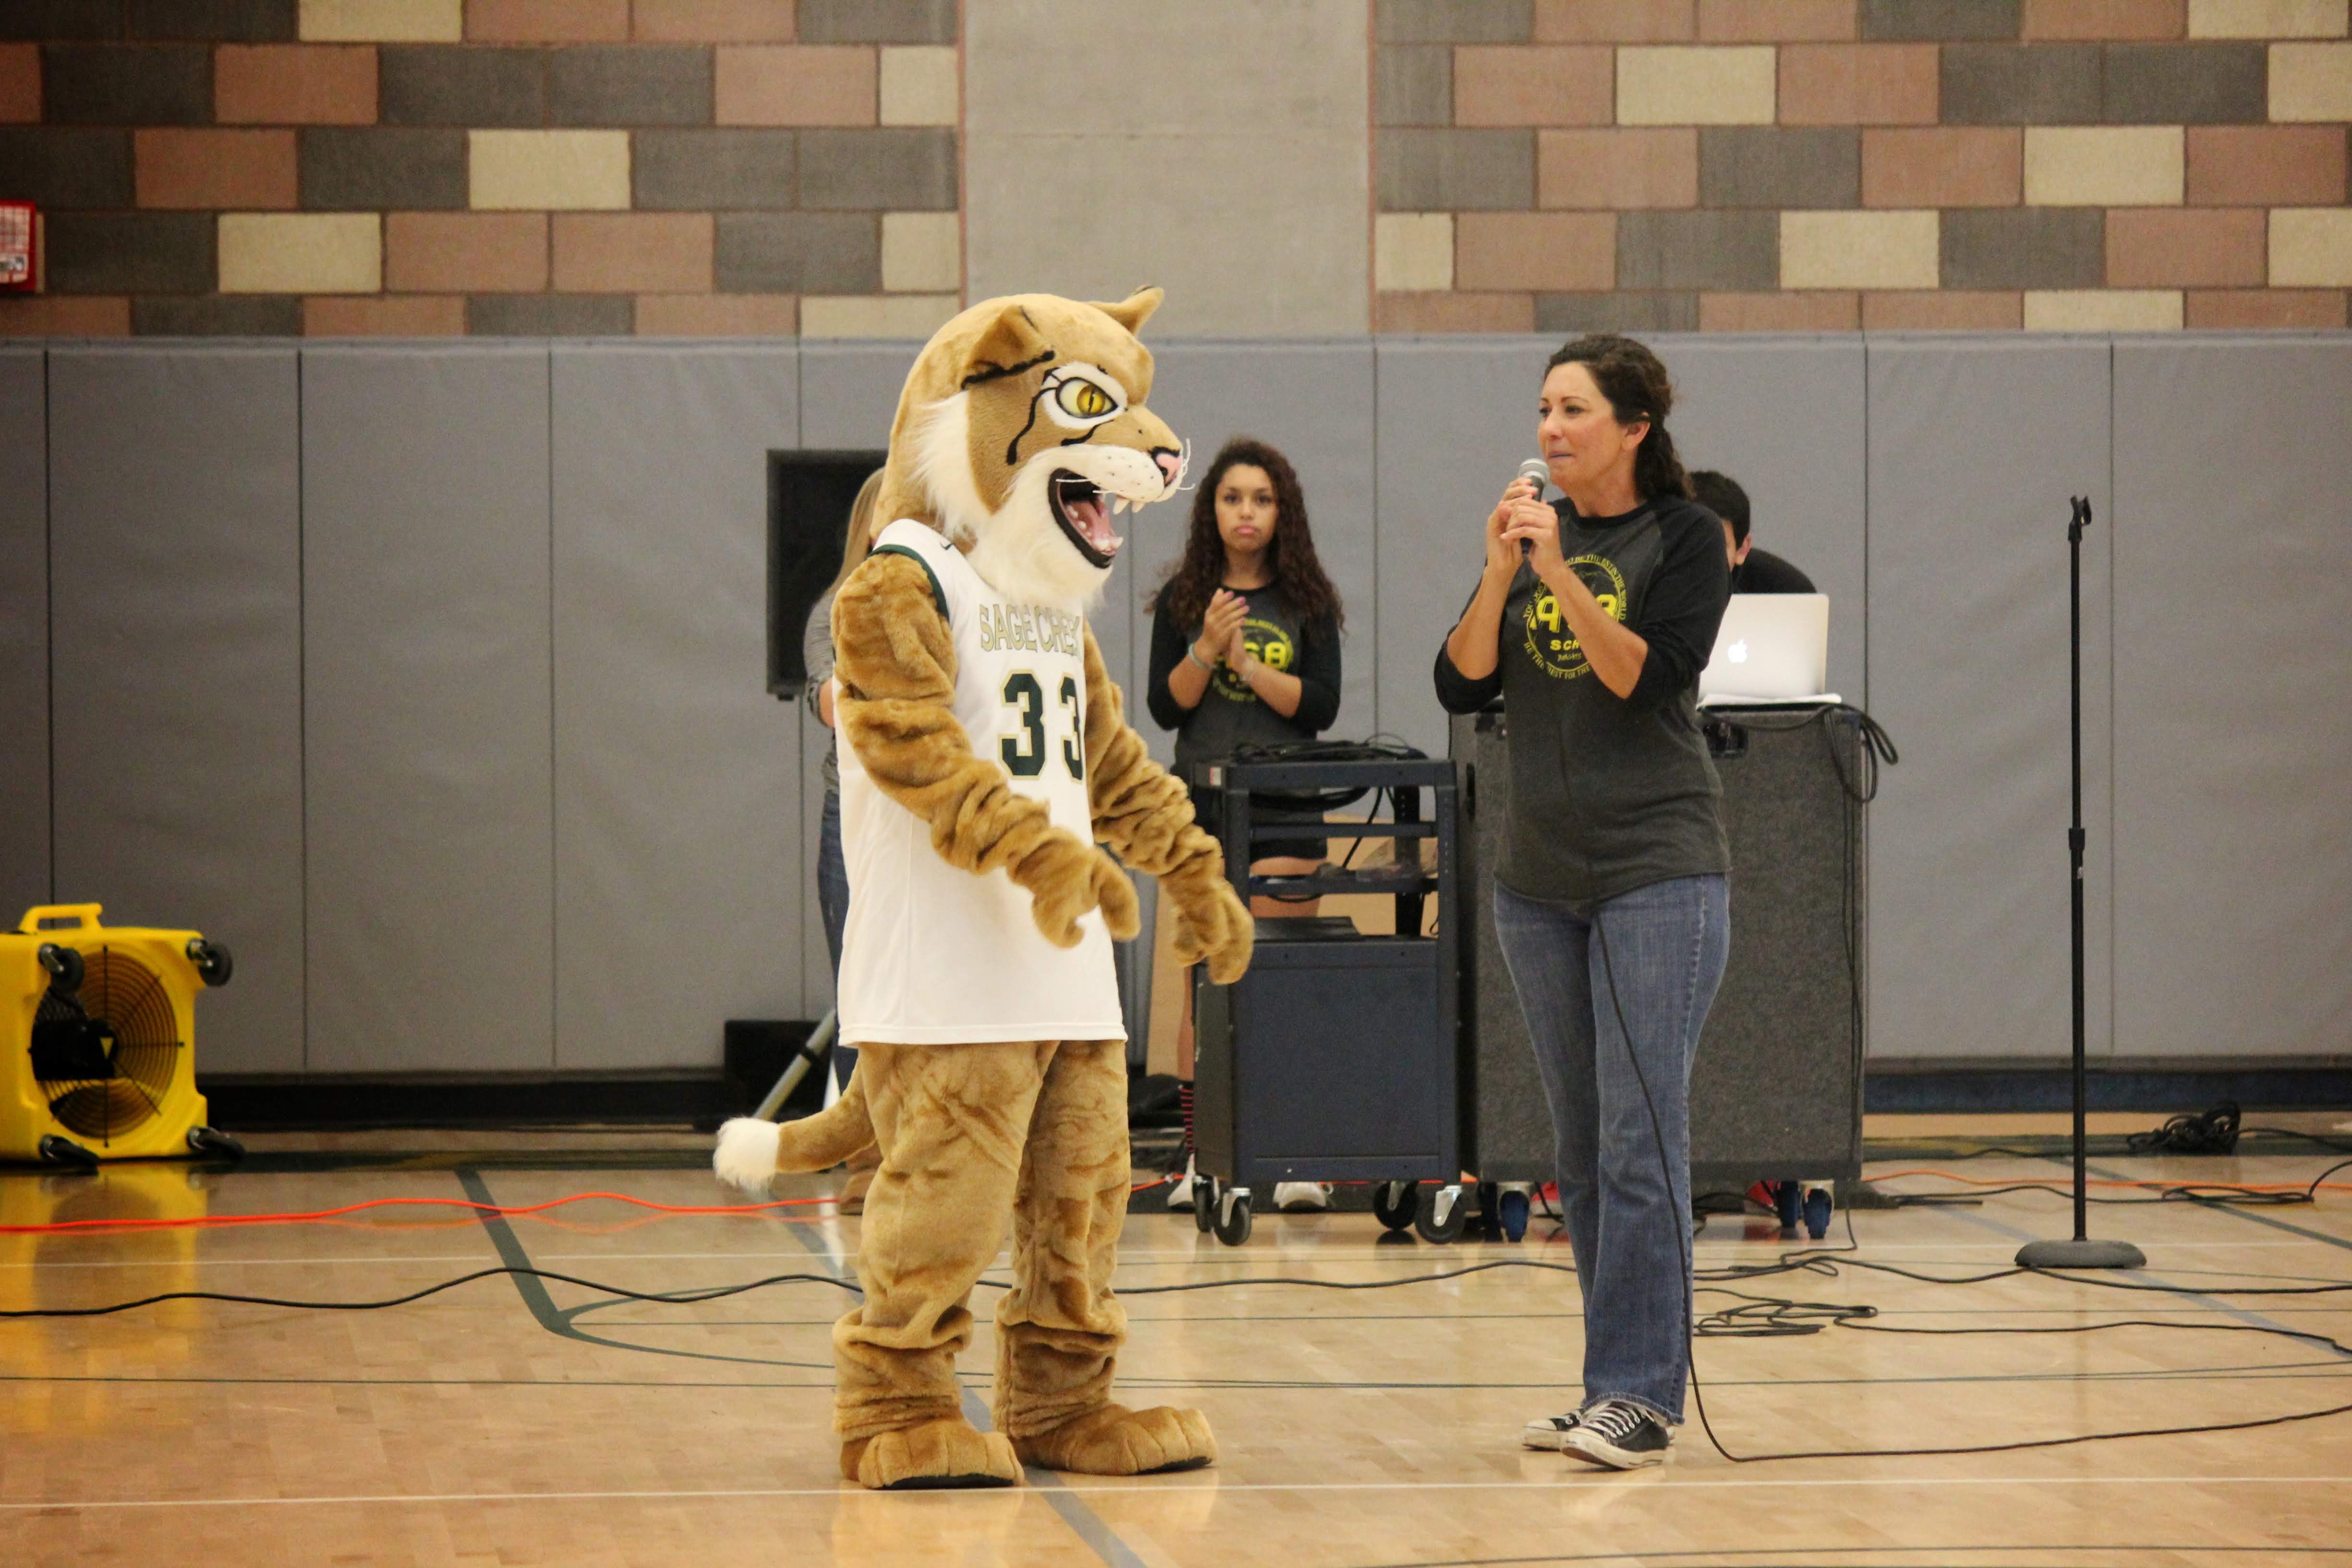 Evans leads a pep rally for the Class of 2017 and Class of 2018, the only two in attendance during her run as adviser.